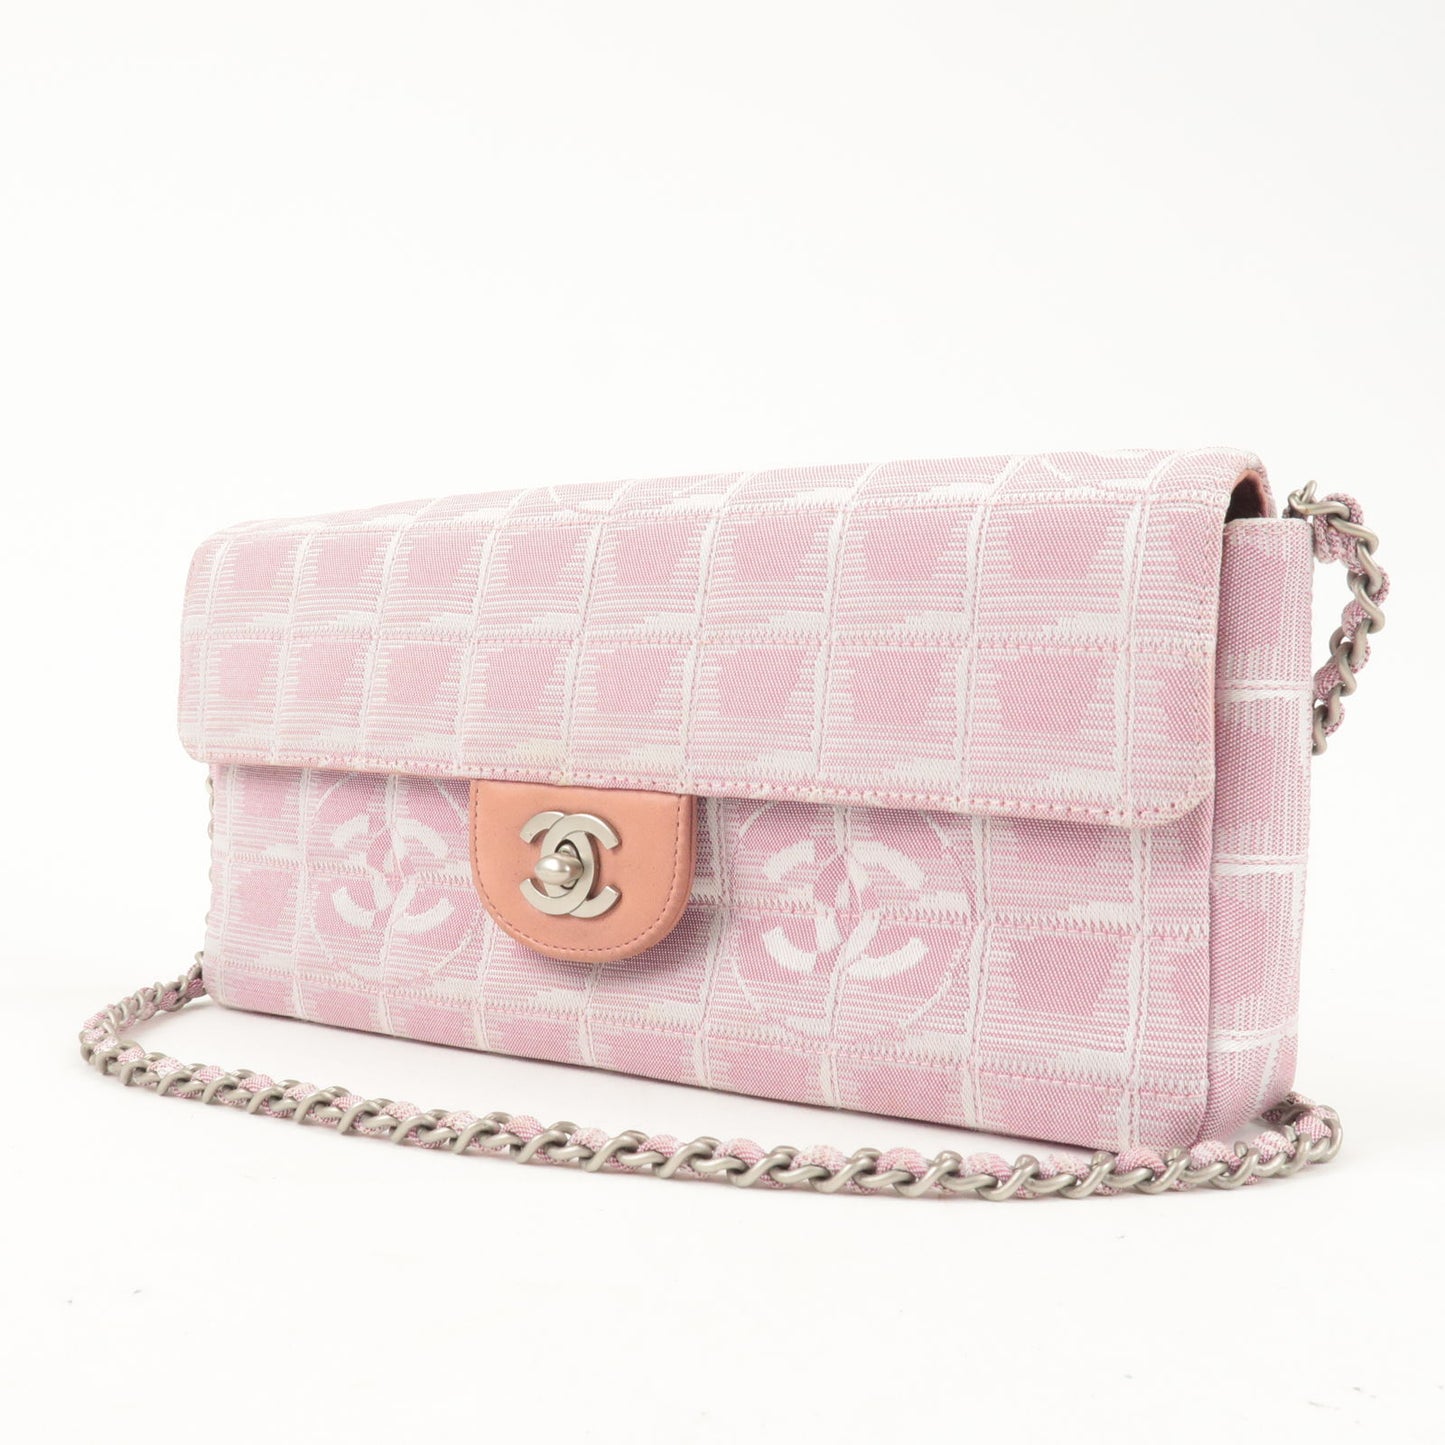 CHANEL Travel Line Nylon Jacquard Leather Chain Bag Pink A15316